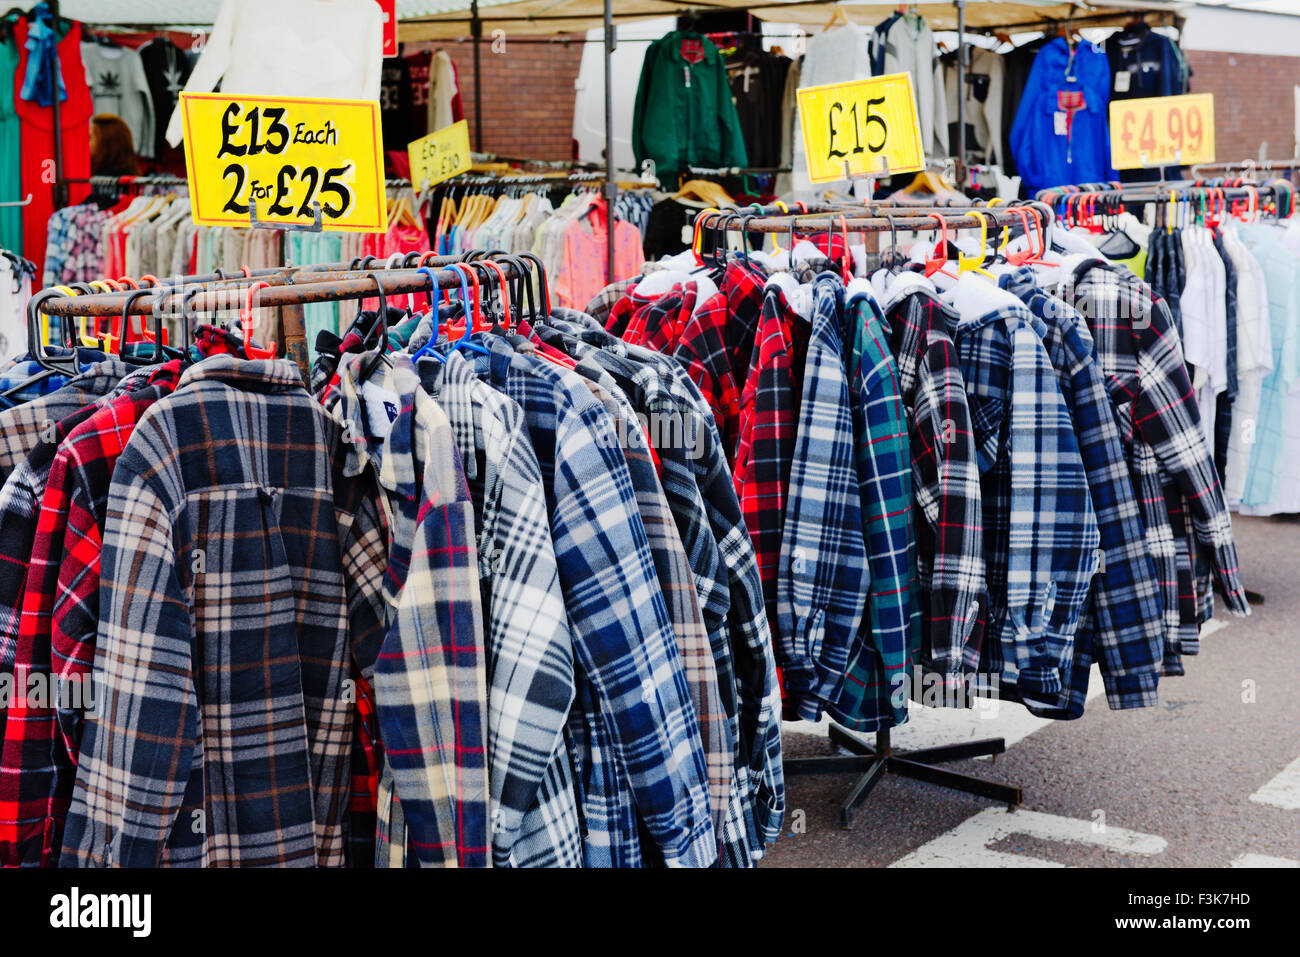 Outdoor market selling shirts Stock Photo